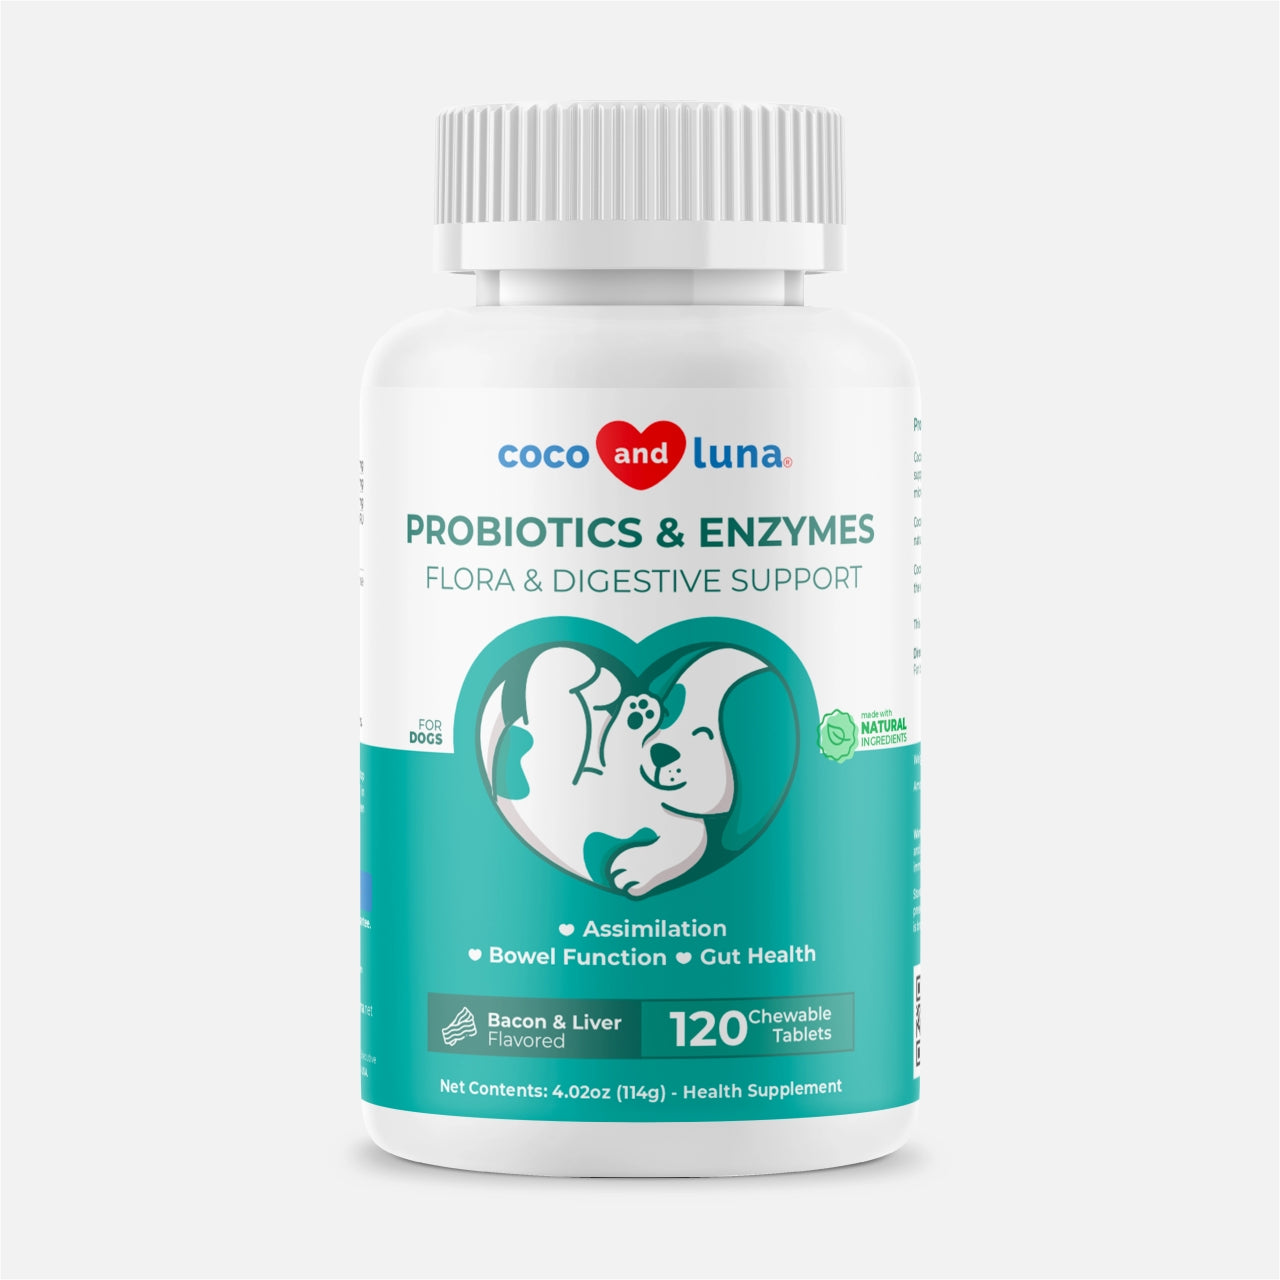 Probiotics and Enzymes for Dogs - 120 Chewable Tablets - Coco and Luna